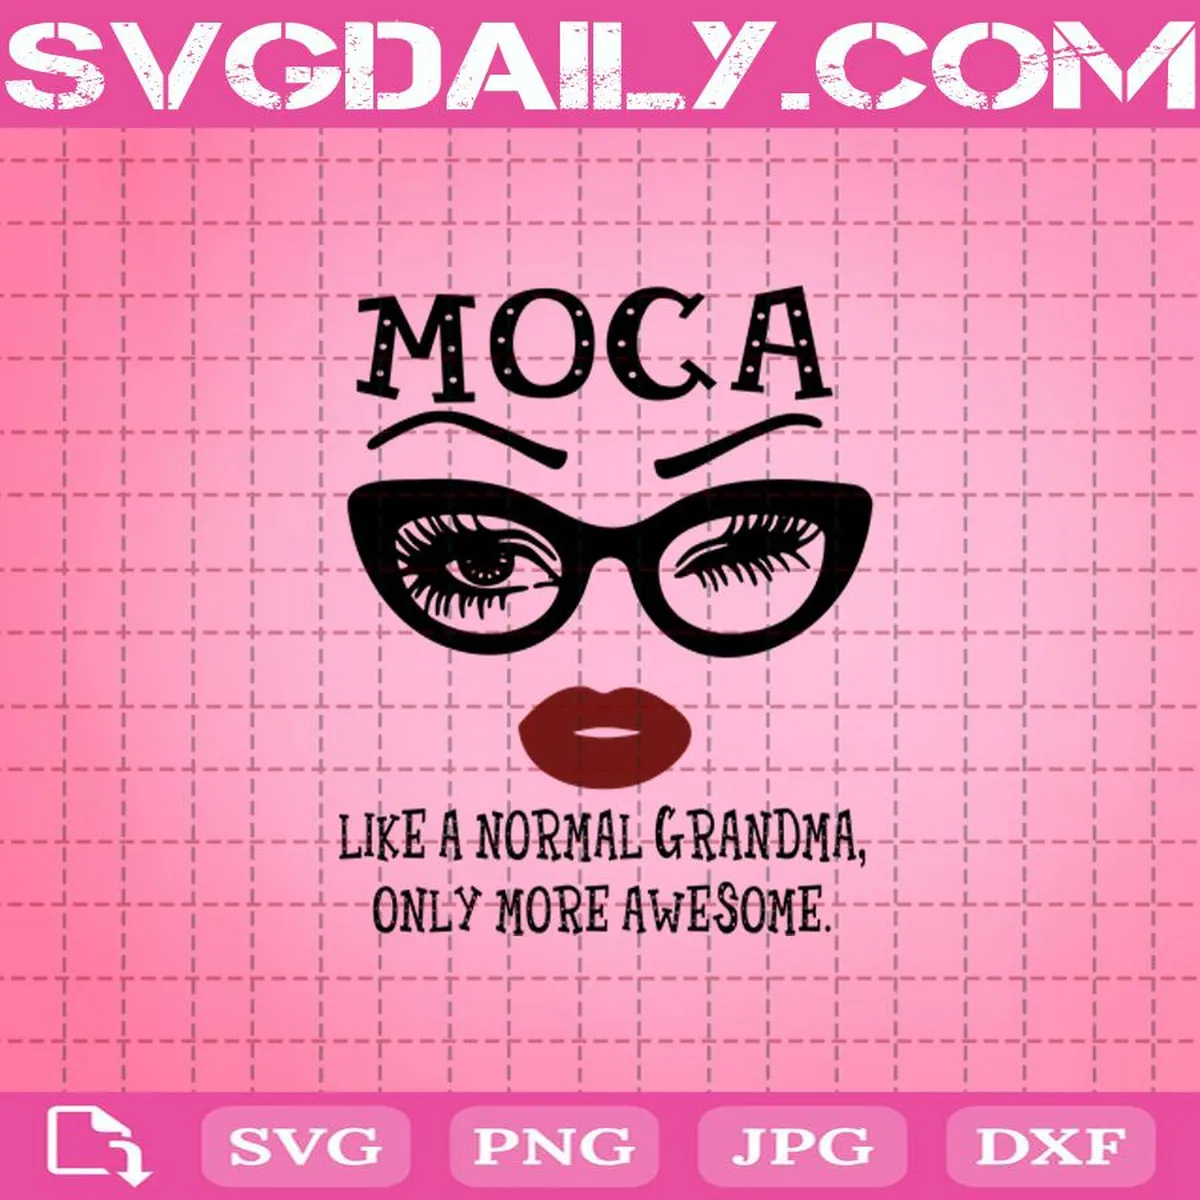 Moca Like A Normal Grandma, Only More Awesome Svg, Moca Svg, Awesome Glasses Face Svg, Awesome Eyes Lip Svg